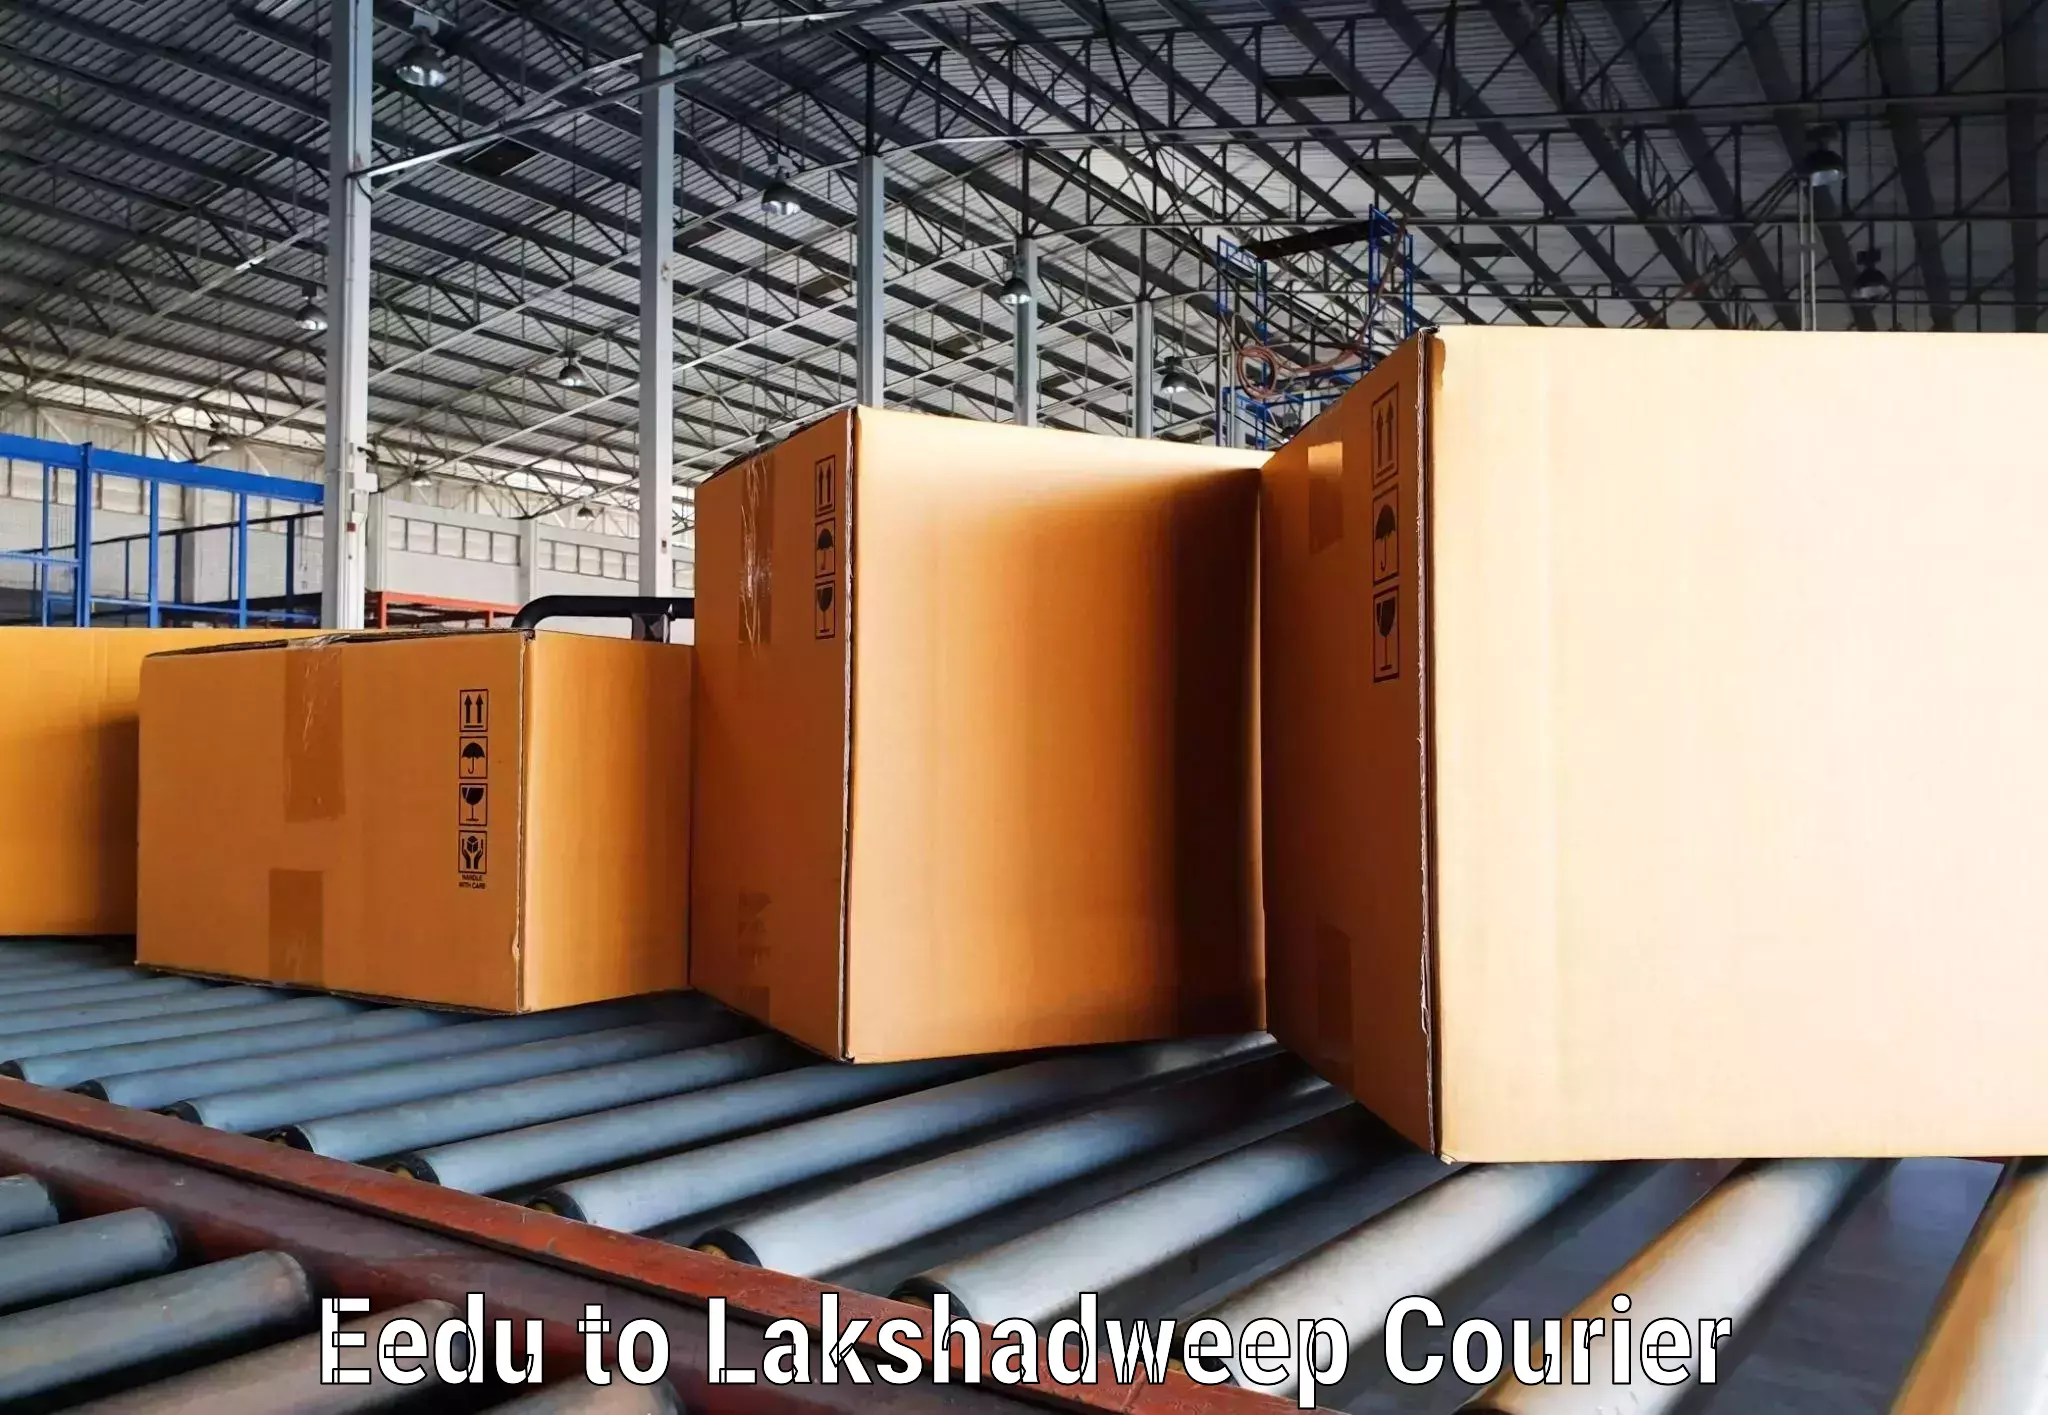 Advanced shipping network in Eedu to Lakshadweep